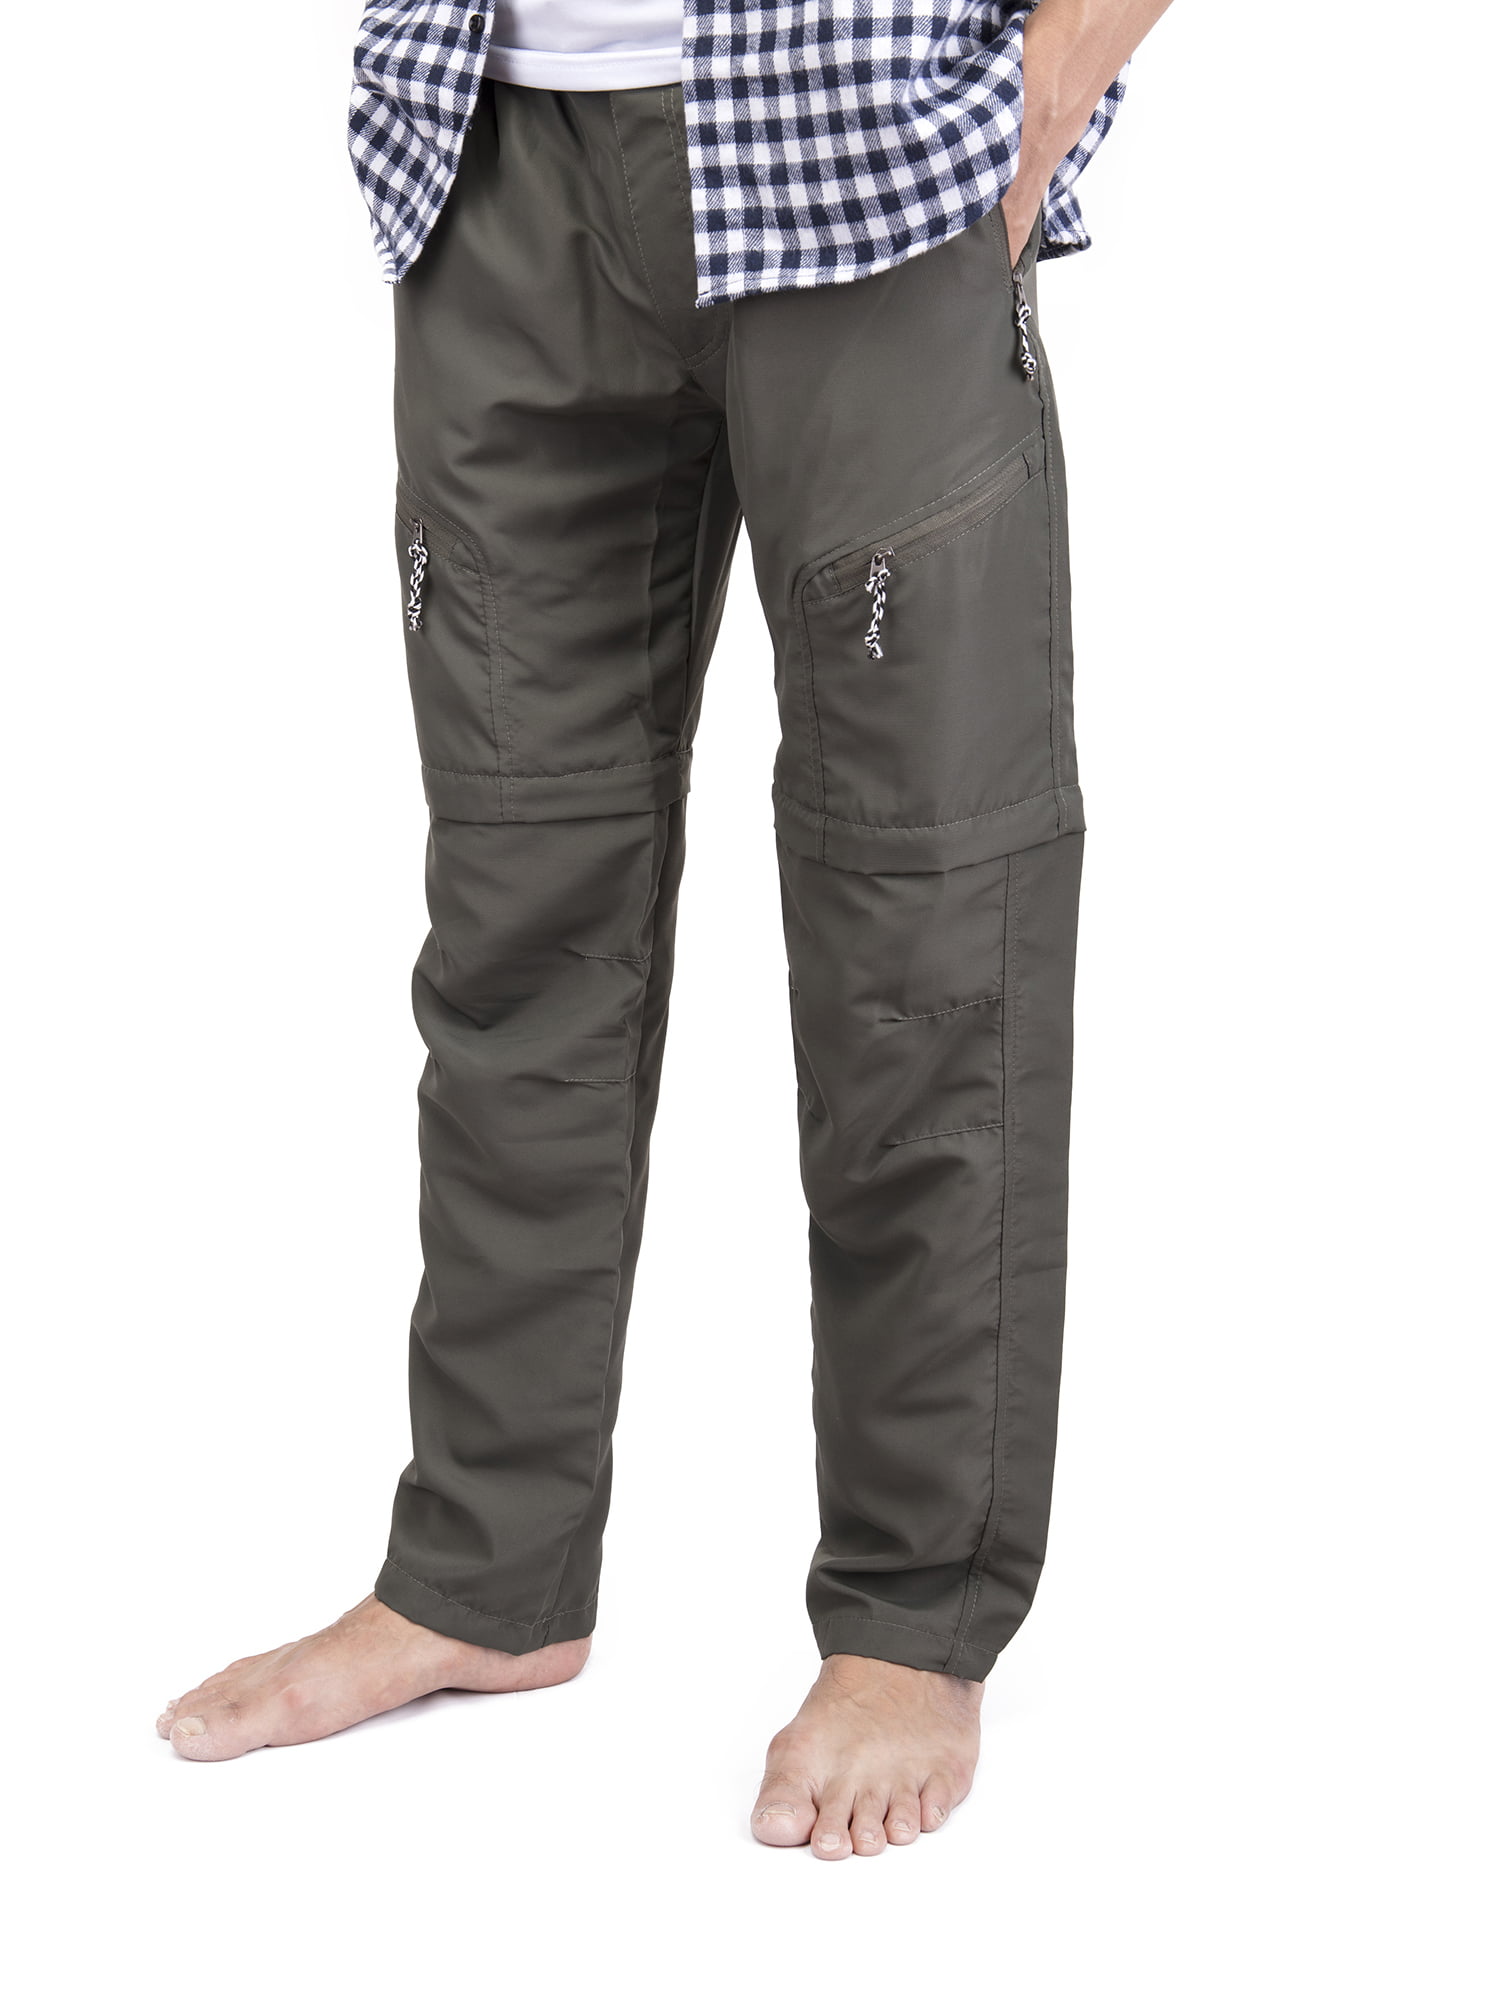 Hiking Pants Mens Fishing Cargo Lightweight Quick Dry Outdoor Work Anytime Nylon Pants